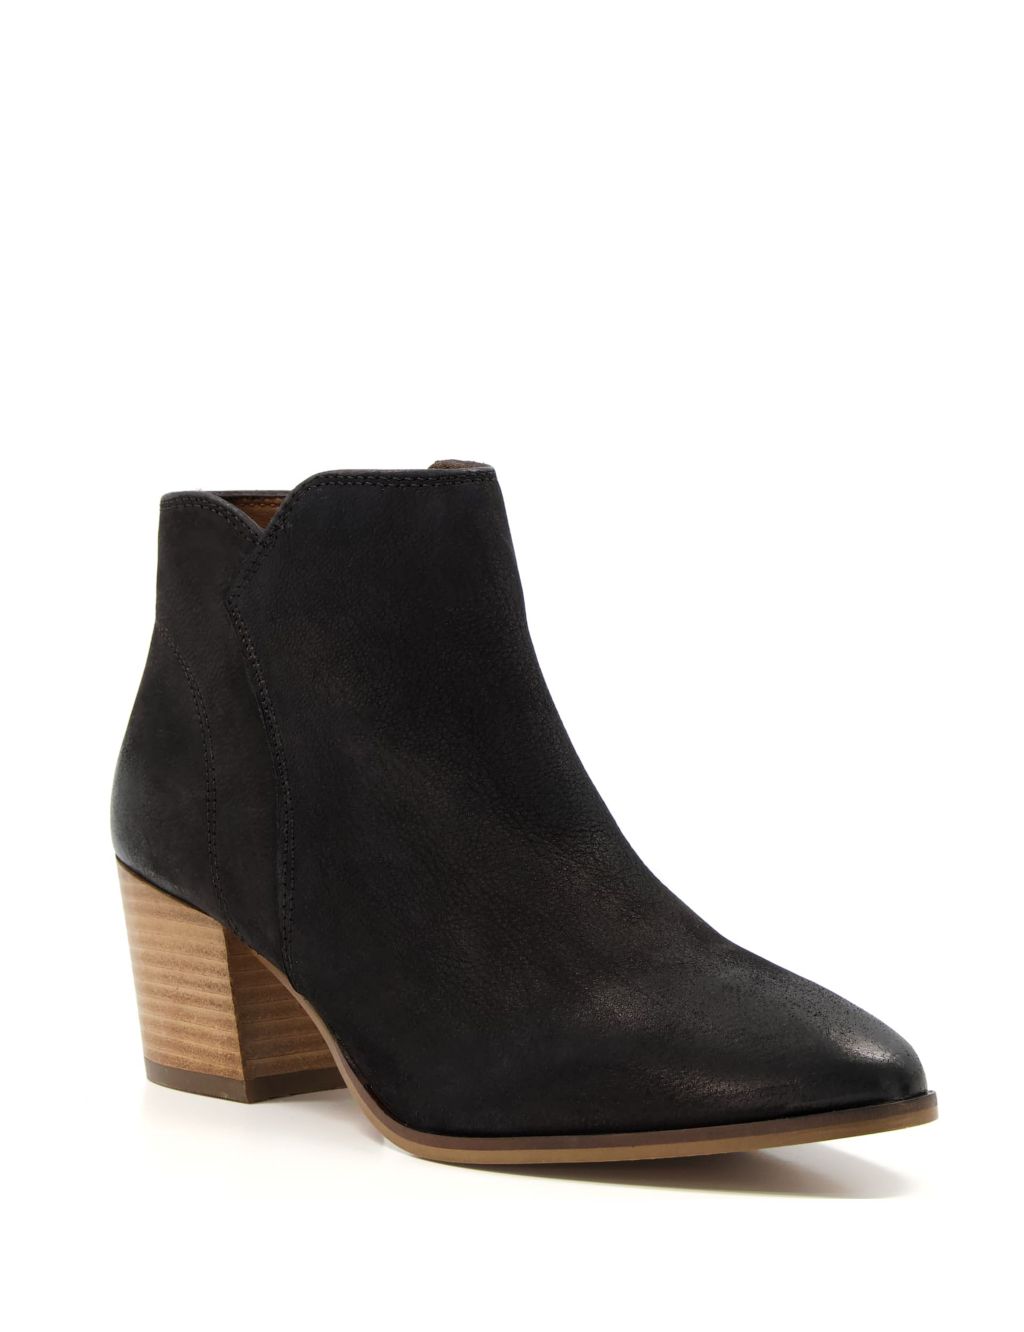 Buy Wide Fit Suede Block Heel Ankle Boots | Dune London | M&S